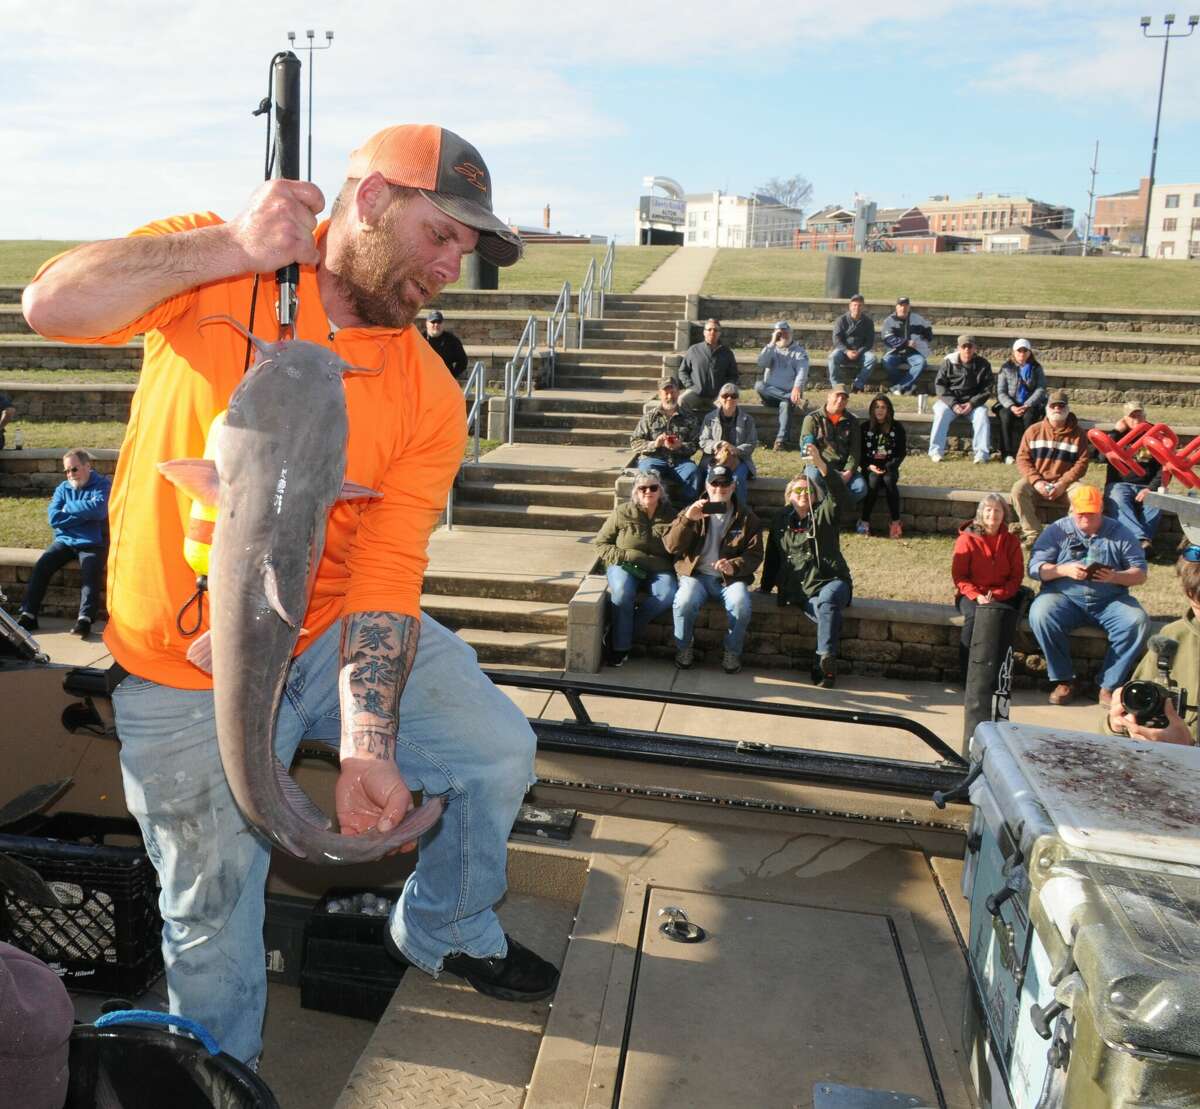 A competitor in Saturday's Twisted Cat Outdoors Fishing Series tournament in Alton shows off his catch to the crowd. High water, swift currents and Friday's rain were cited for the lower than expected catch.